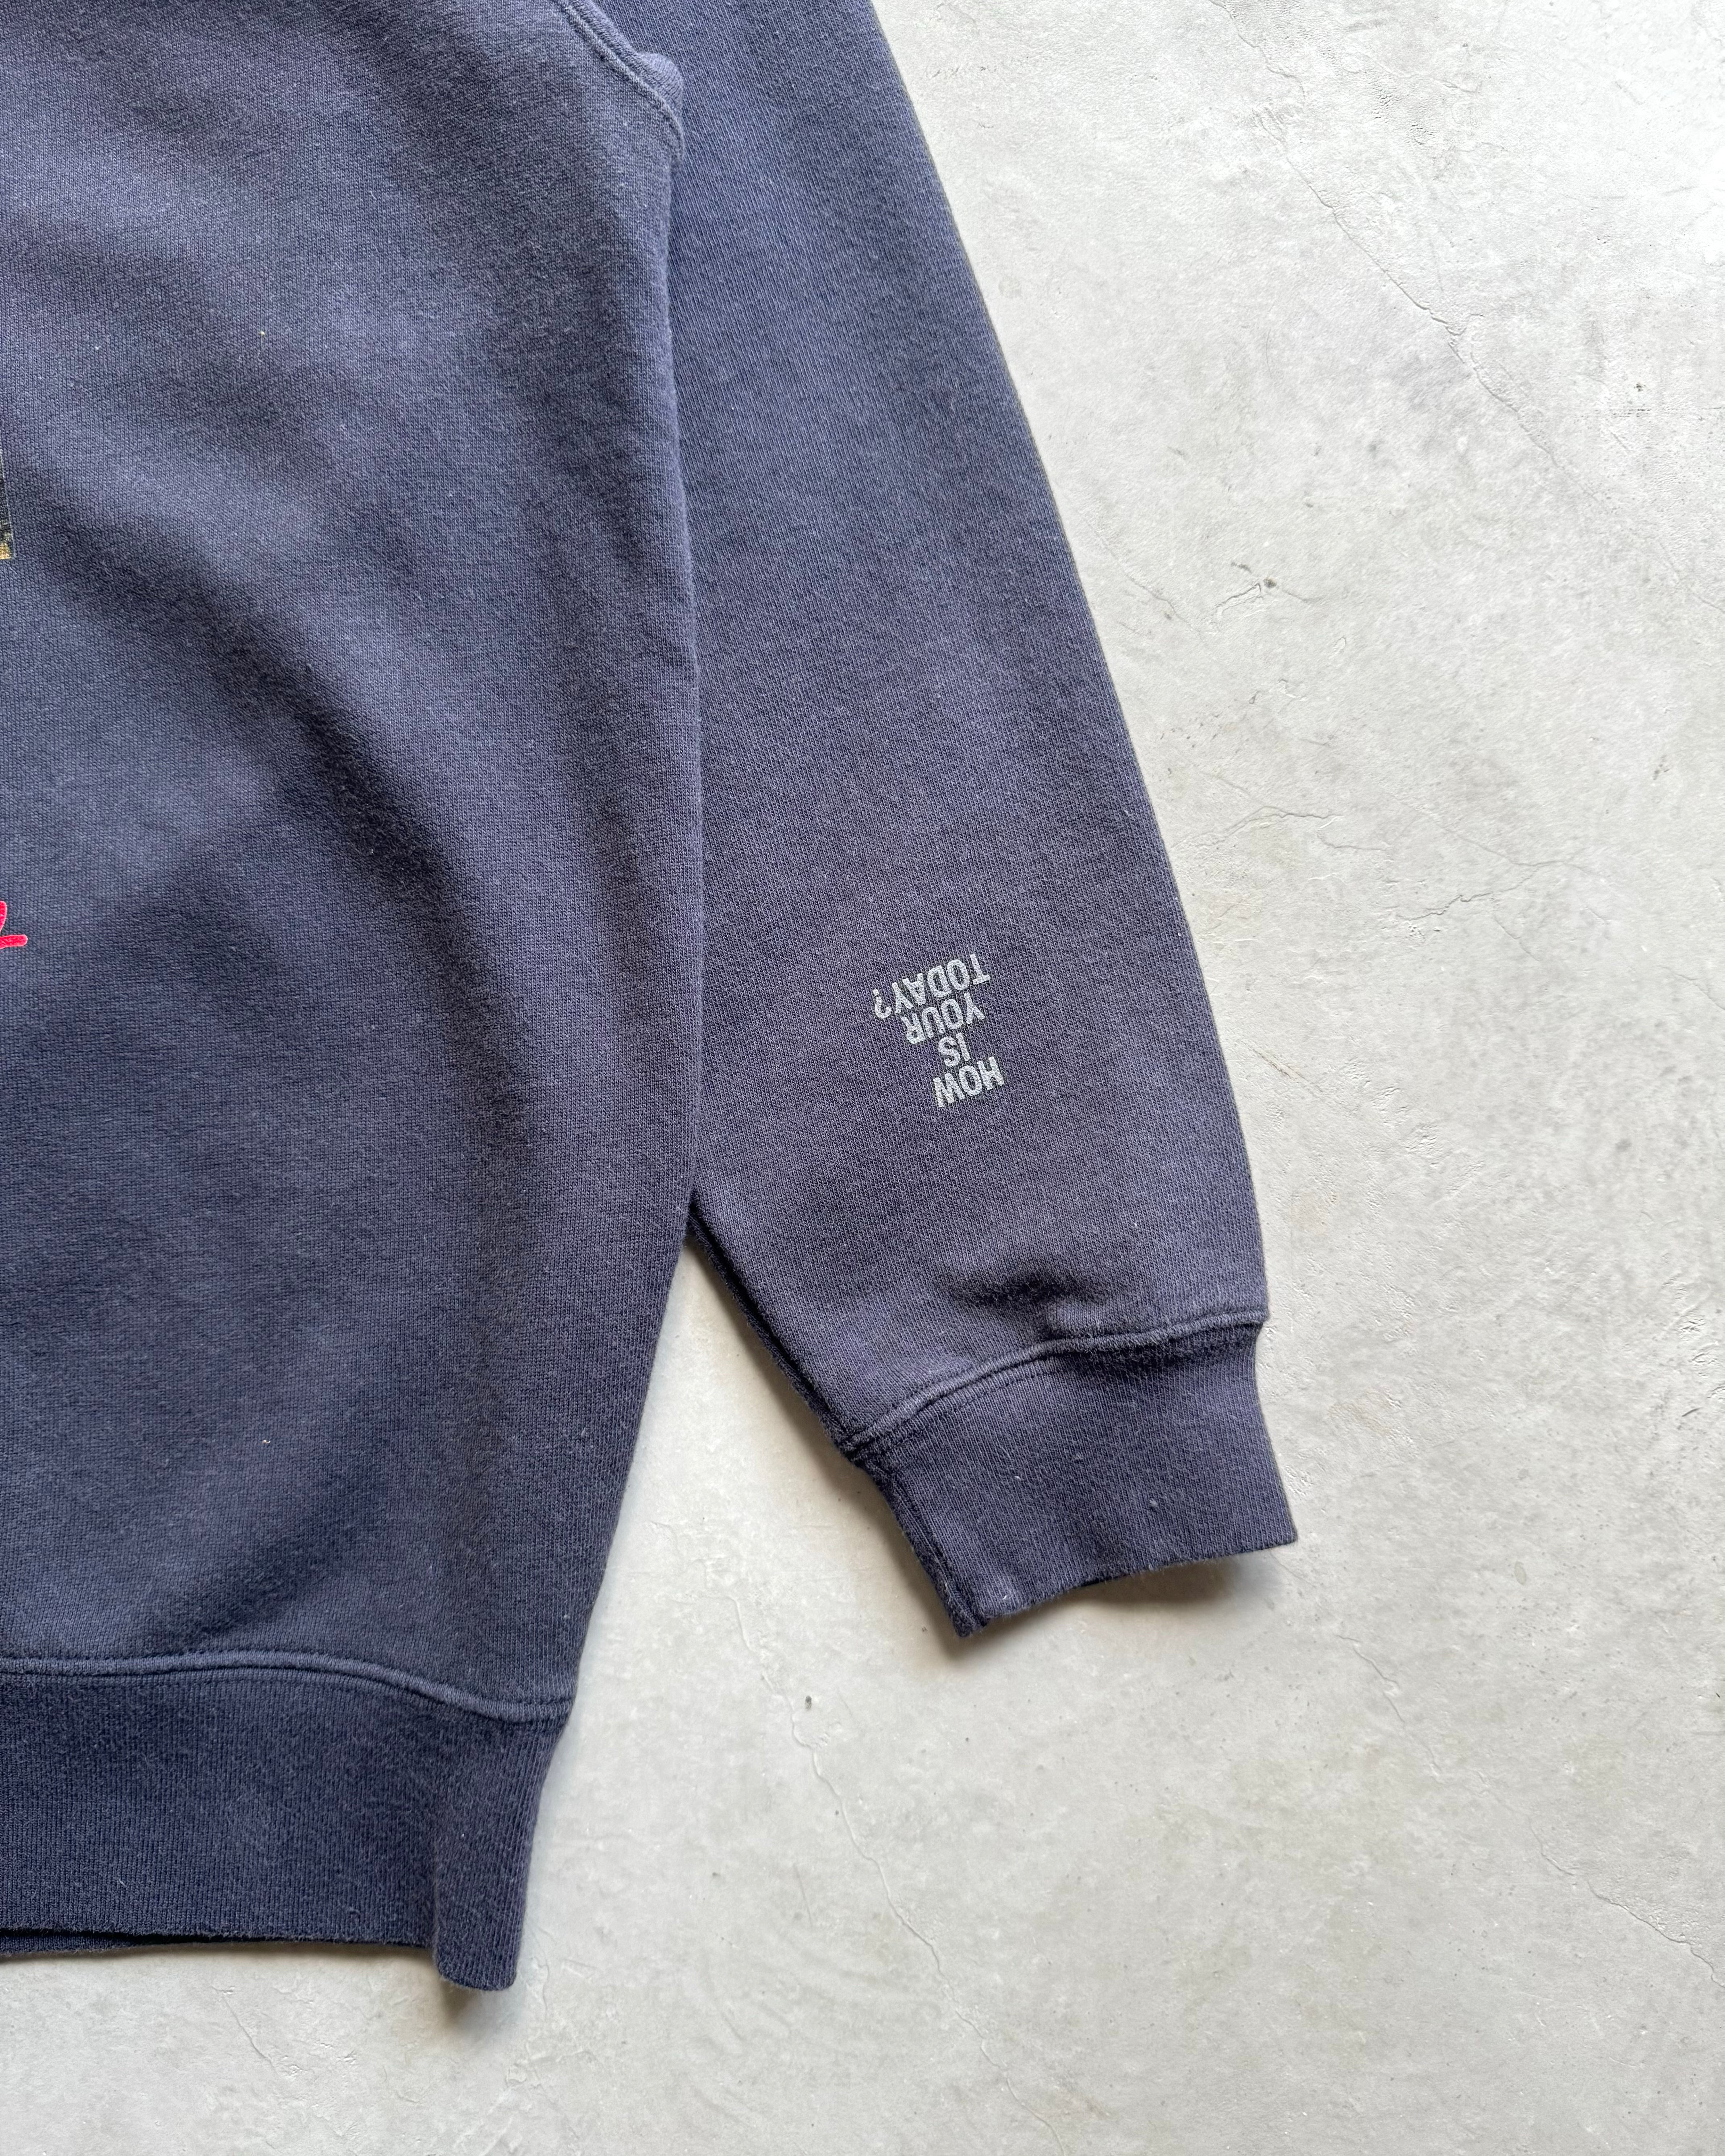 TODAY edition / NYC #5 Sweat - NAVY